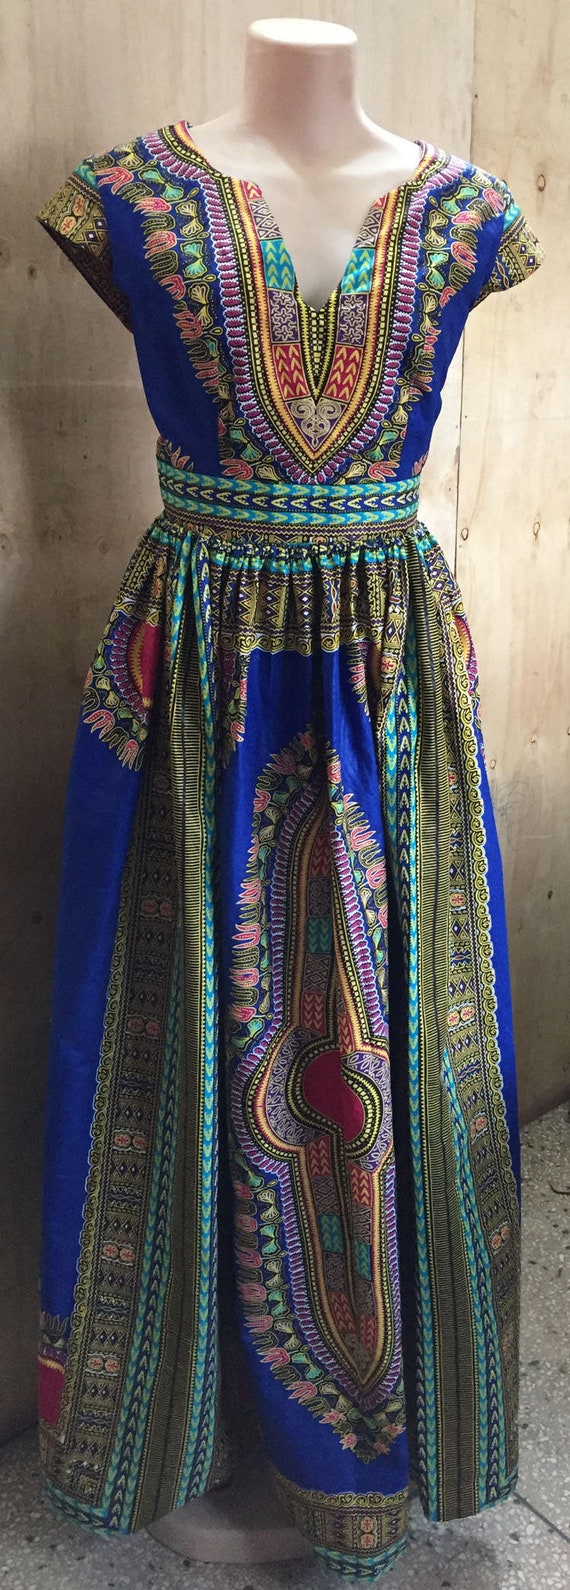 Unique African Prom Dress | Etsy